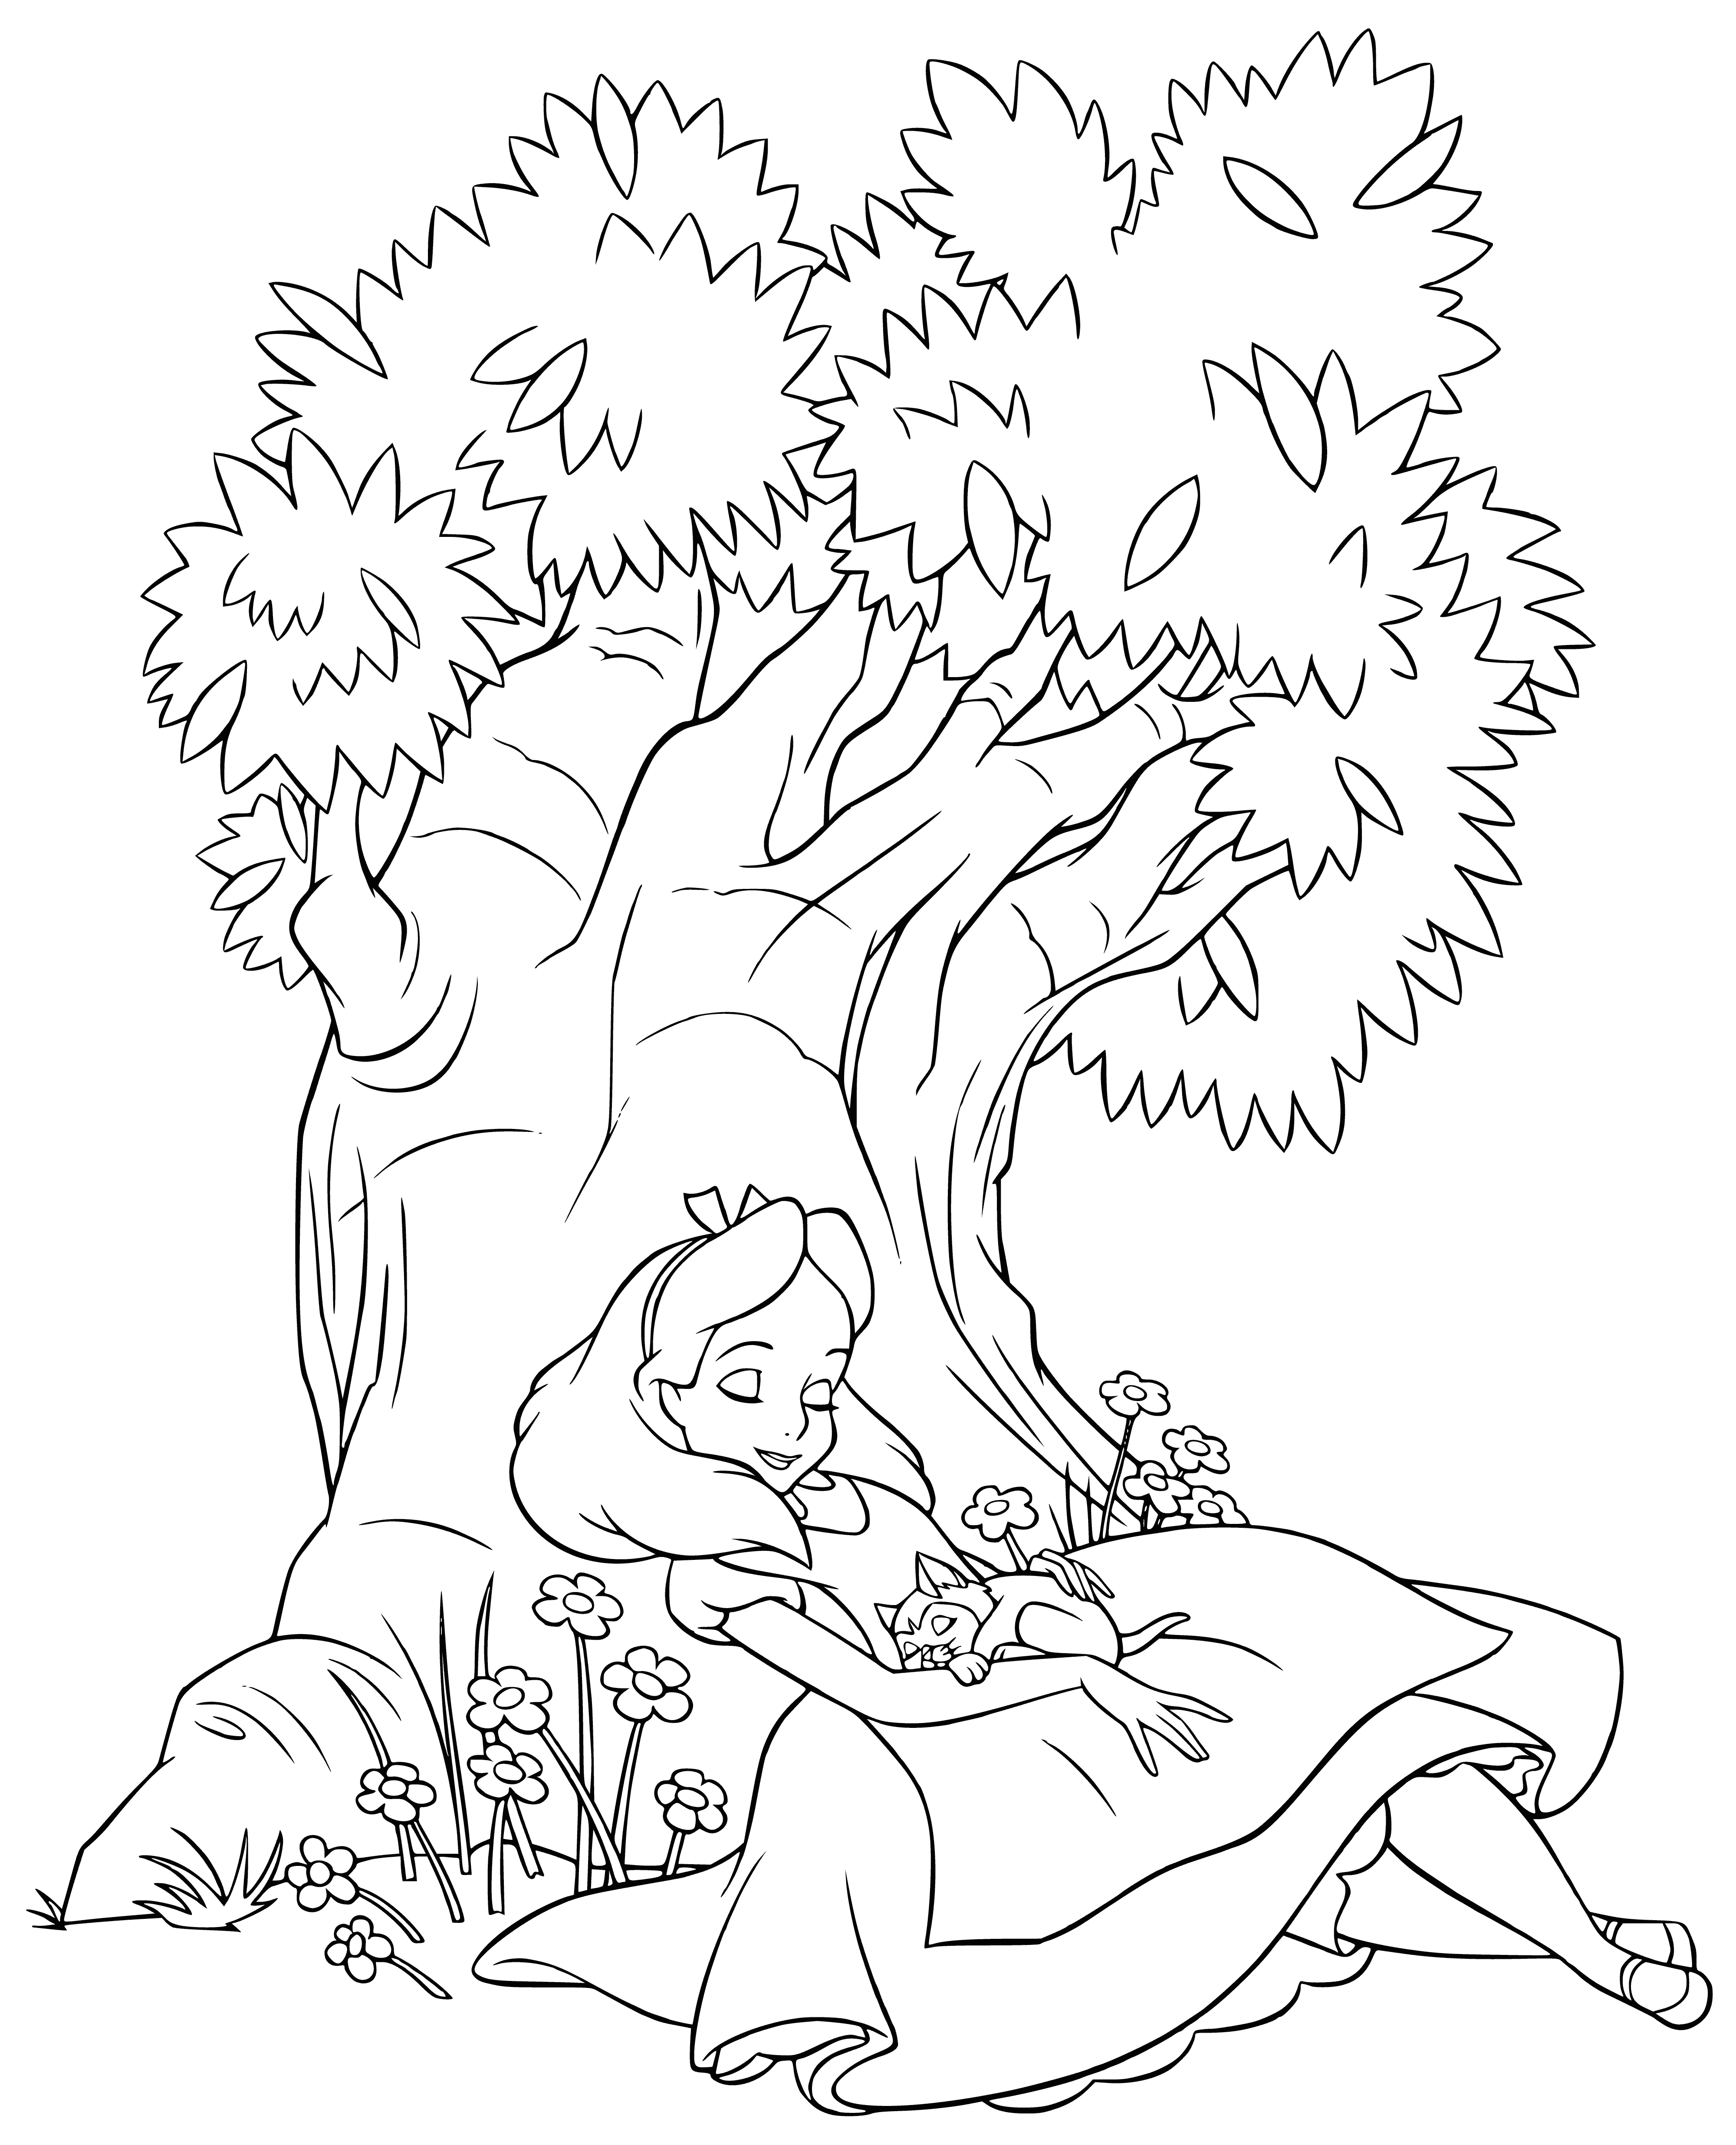 coloring page: Alice sleeps under a tree, wearing a blue dress & white apron. A black cat rests near her. #naptime #catsofinstagram